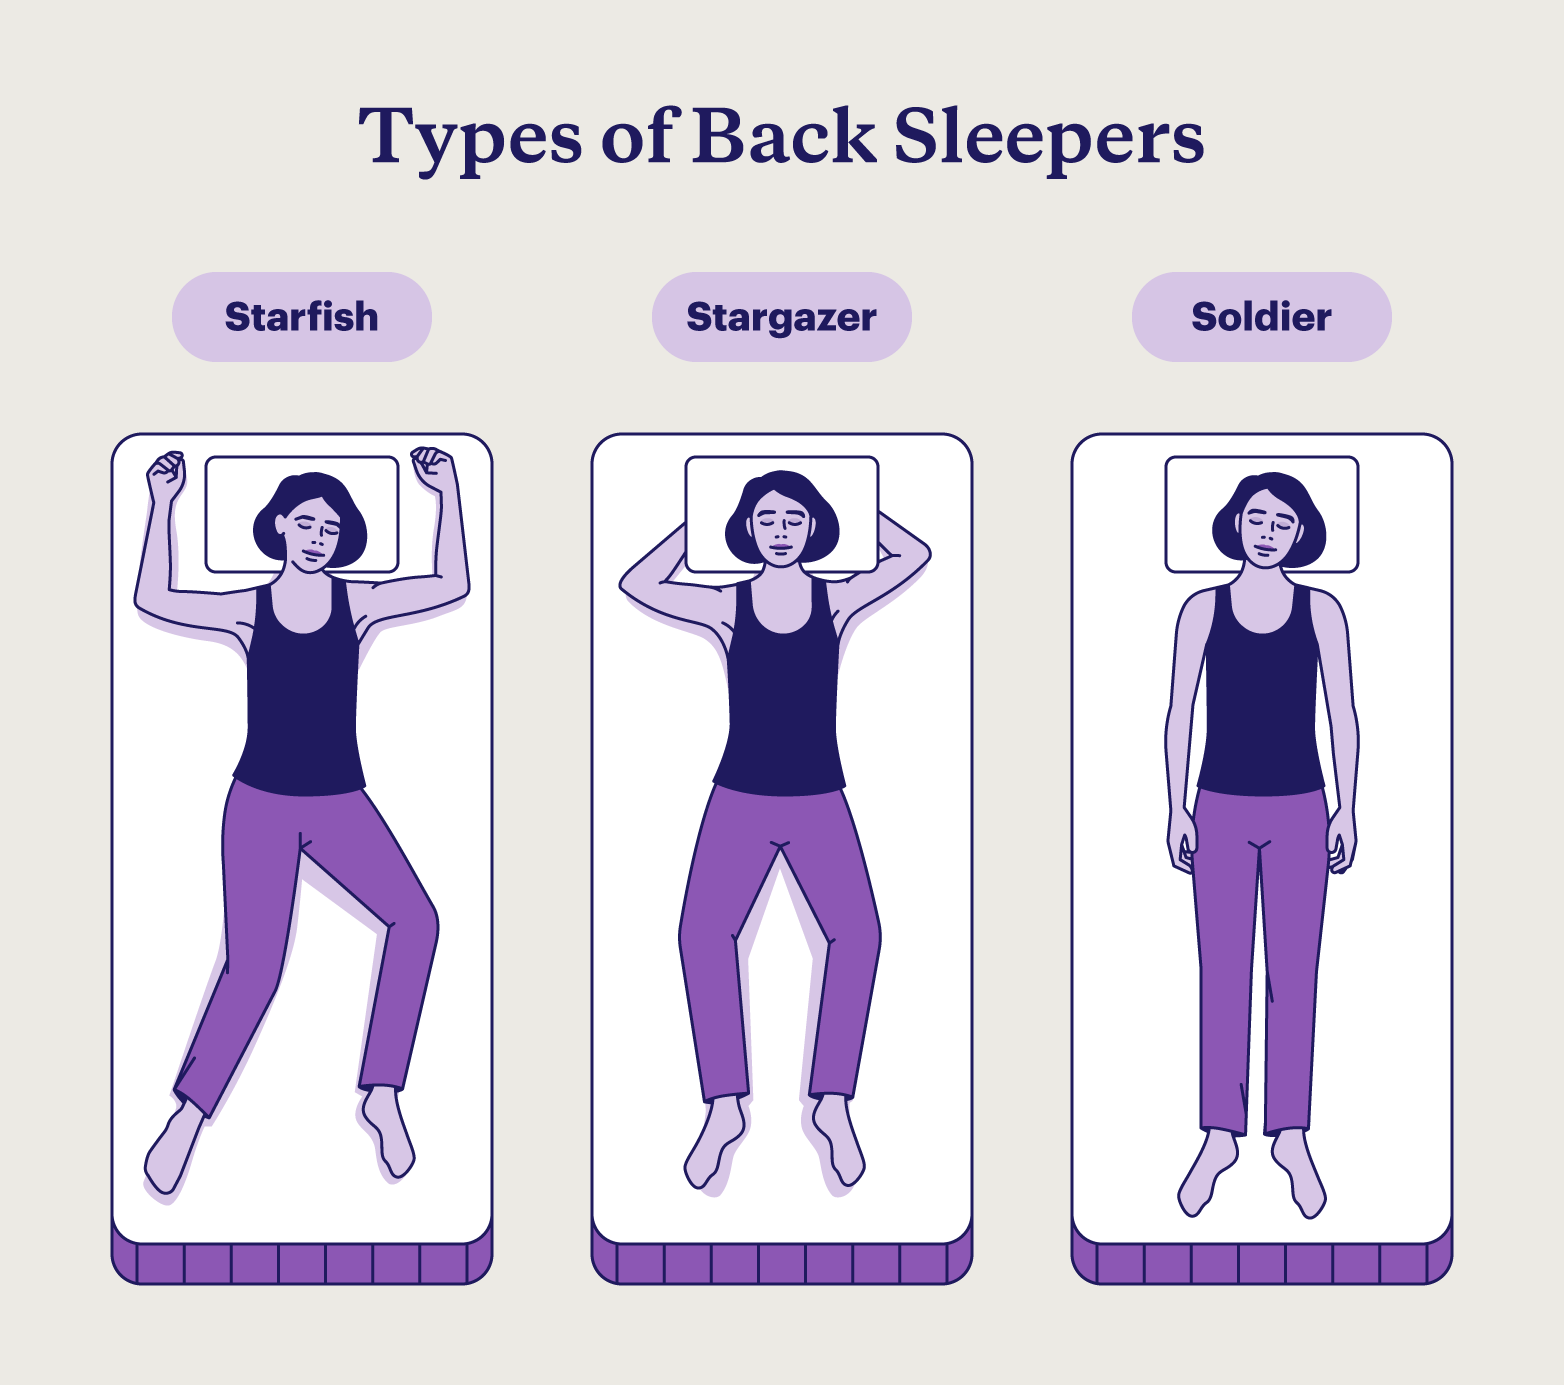 Illustration of three types of back sleeper positions: starfish, stargazer, and soldier.